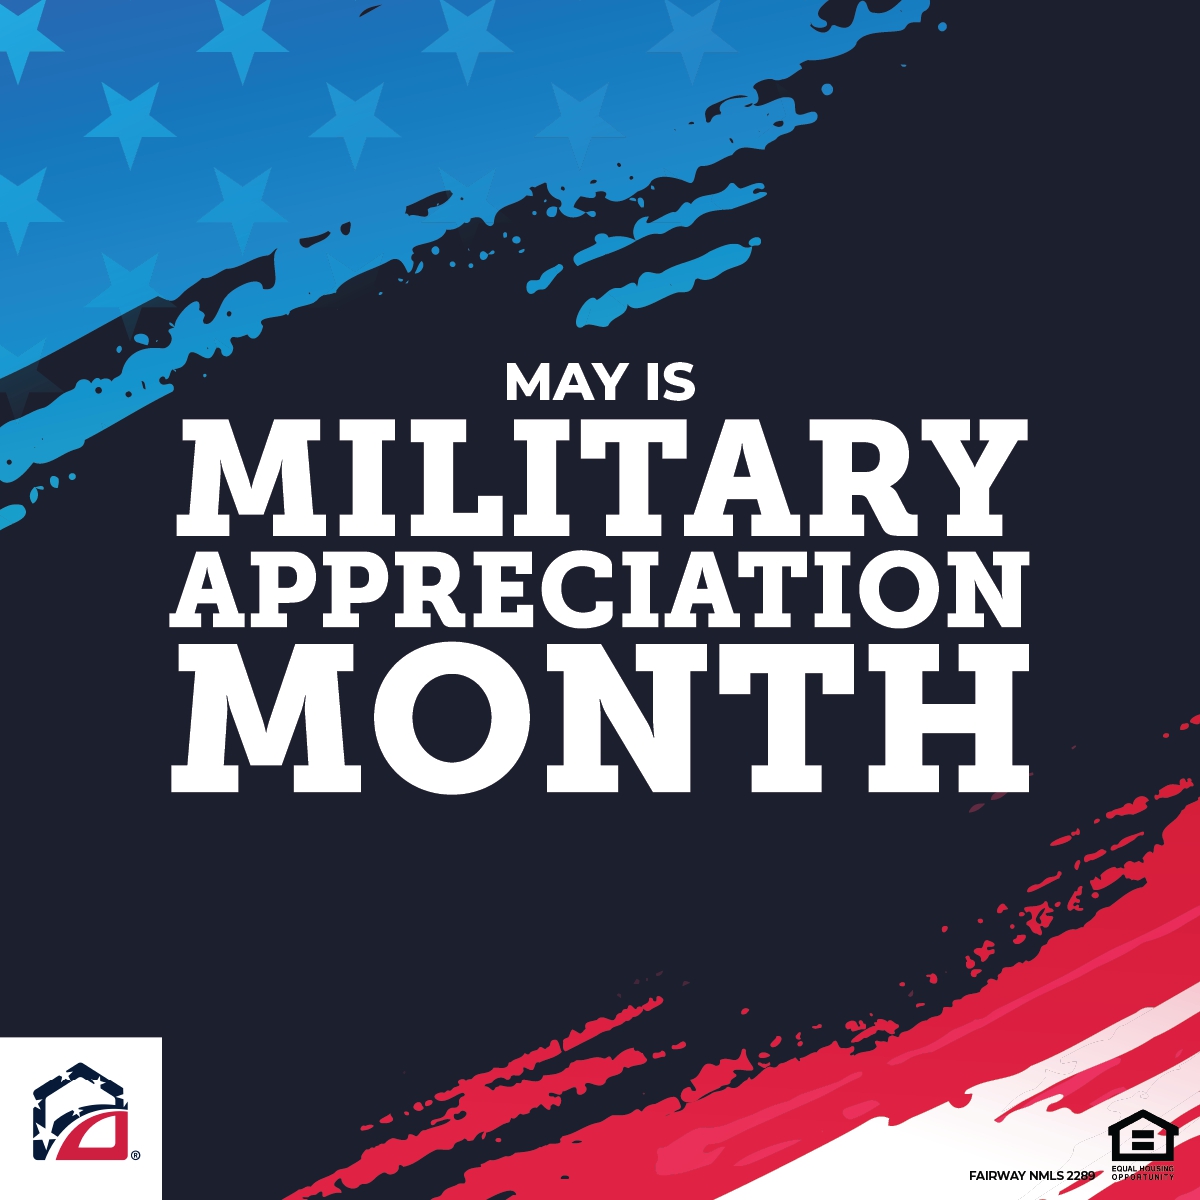 May is Military Appreciation Month, and at Fairway, we are dedicated to honoring and thanking those who have served our country. Do something nice for a veteran, active-duty service member or a member of the reserves today! #jerry_themortgageguy #yourloanexpert #dfwrealestate